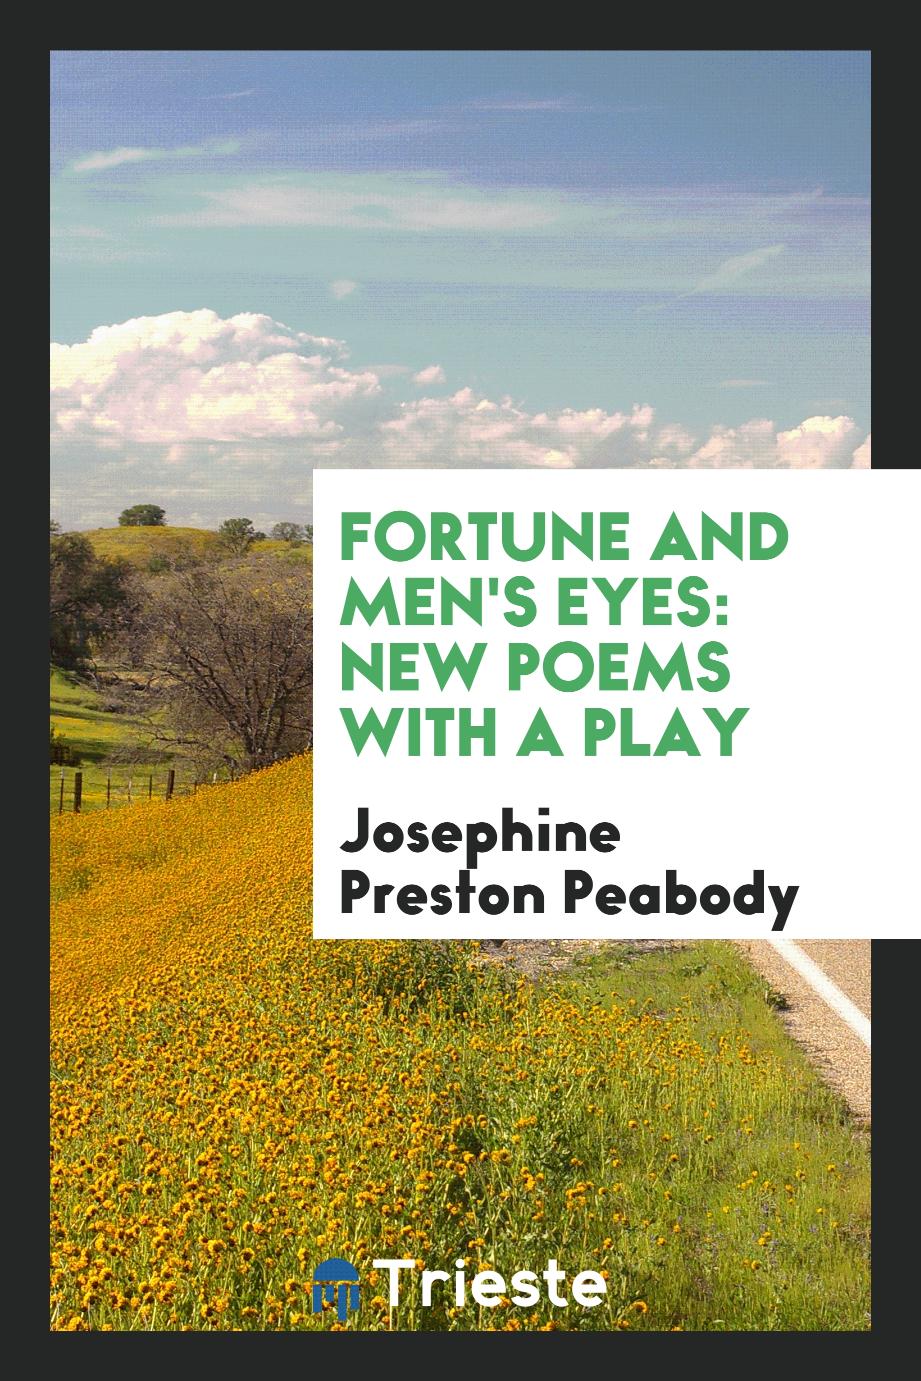 Fortune and Men's Eyes: New Poems with a Play